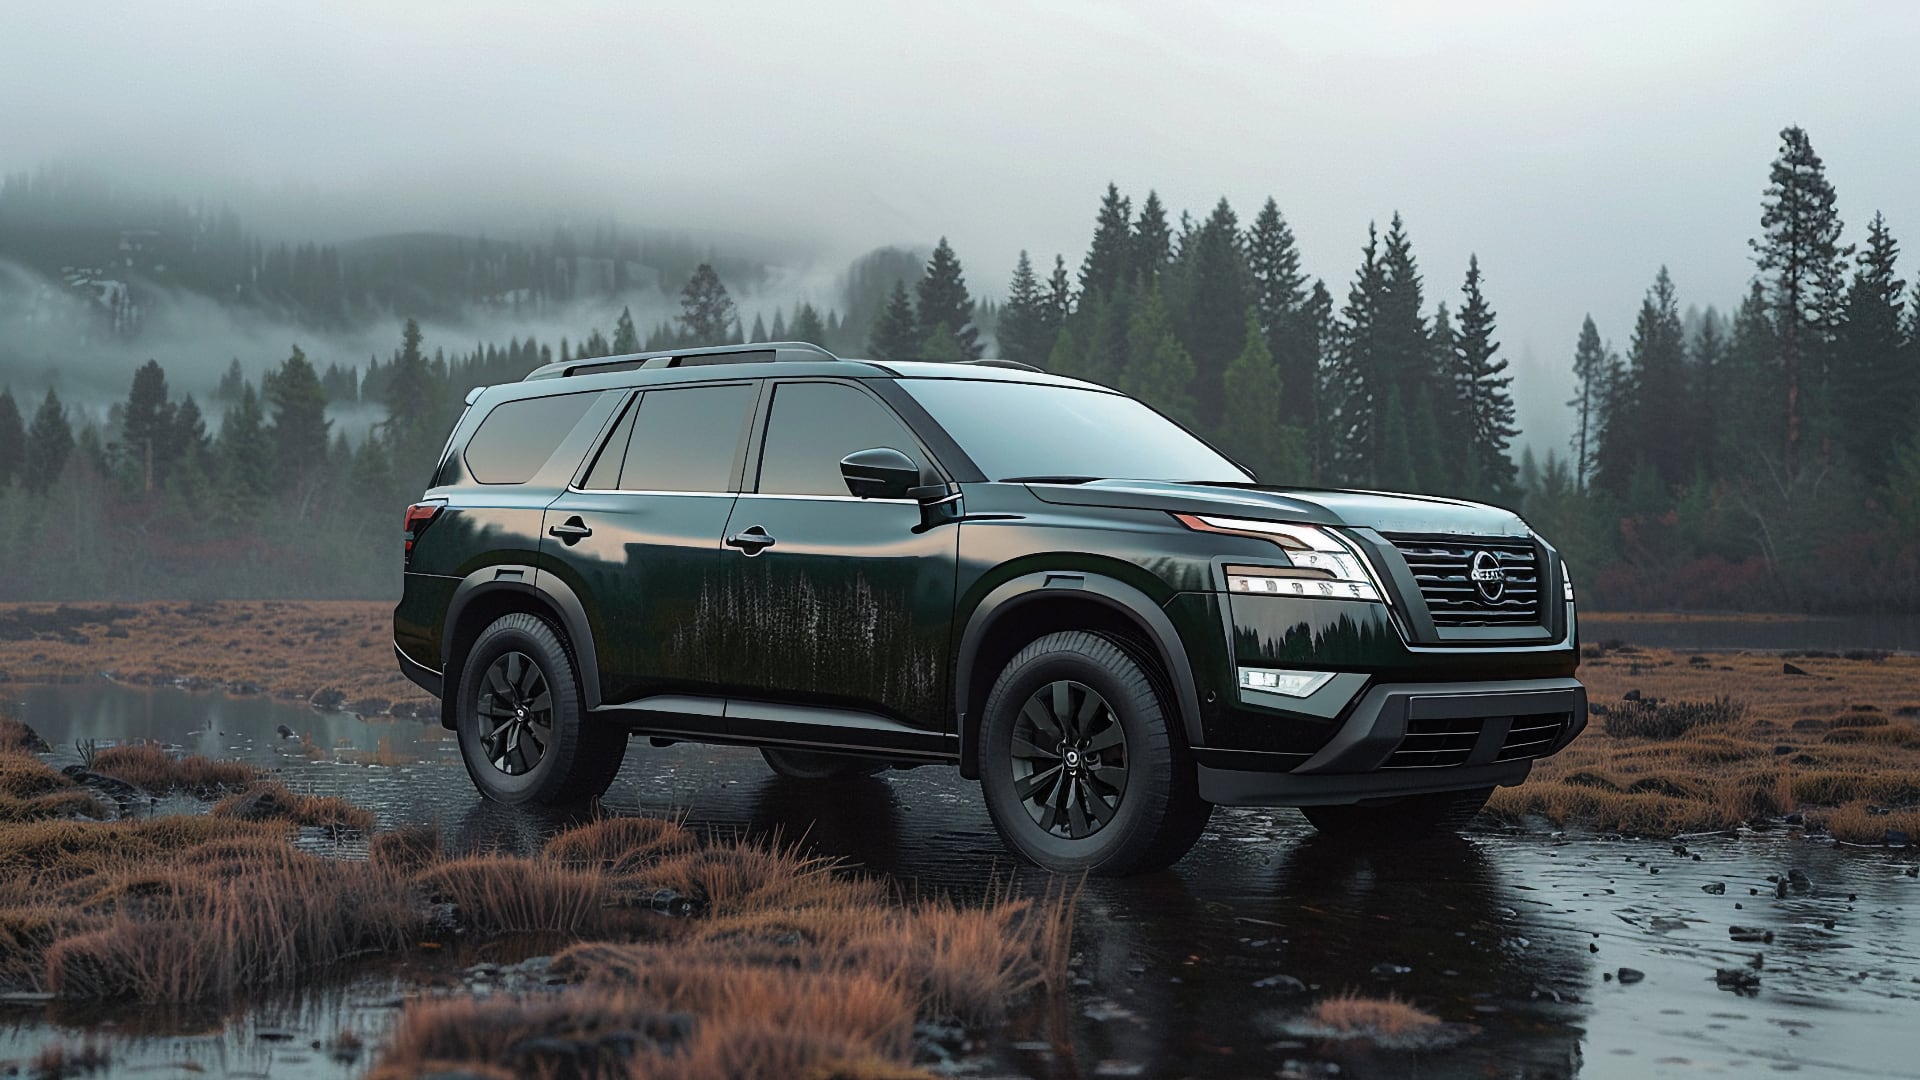 The 2020 Nissan Armada is parked near a pond.